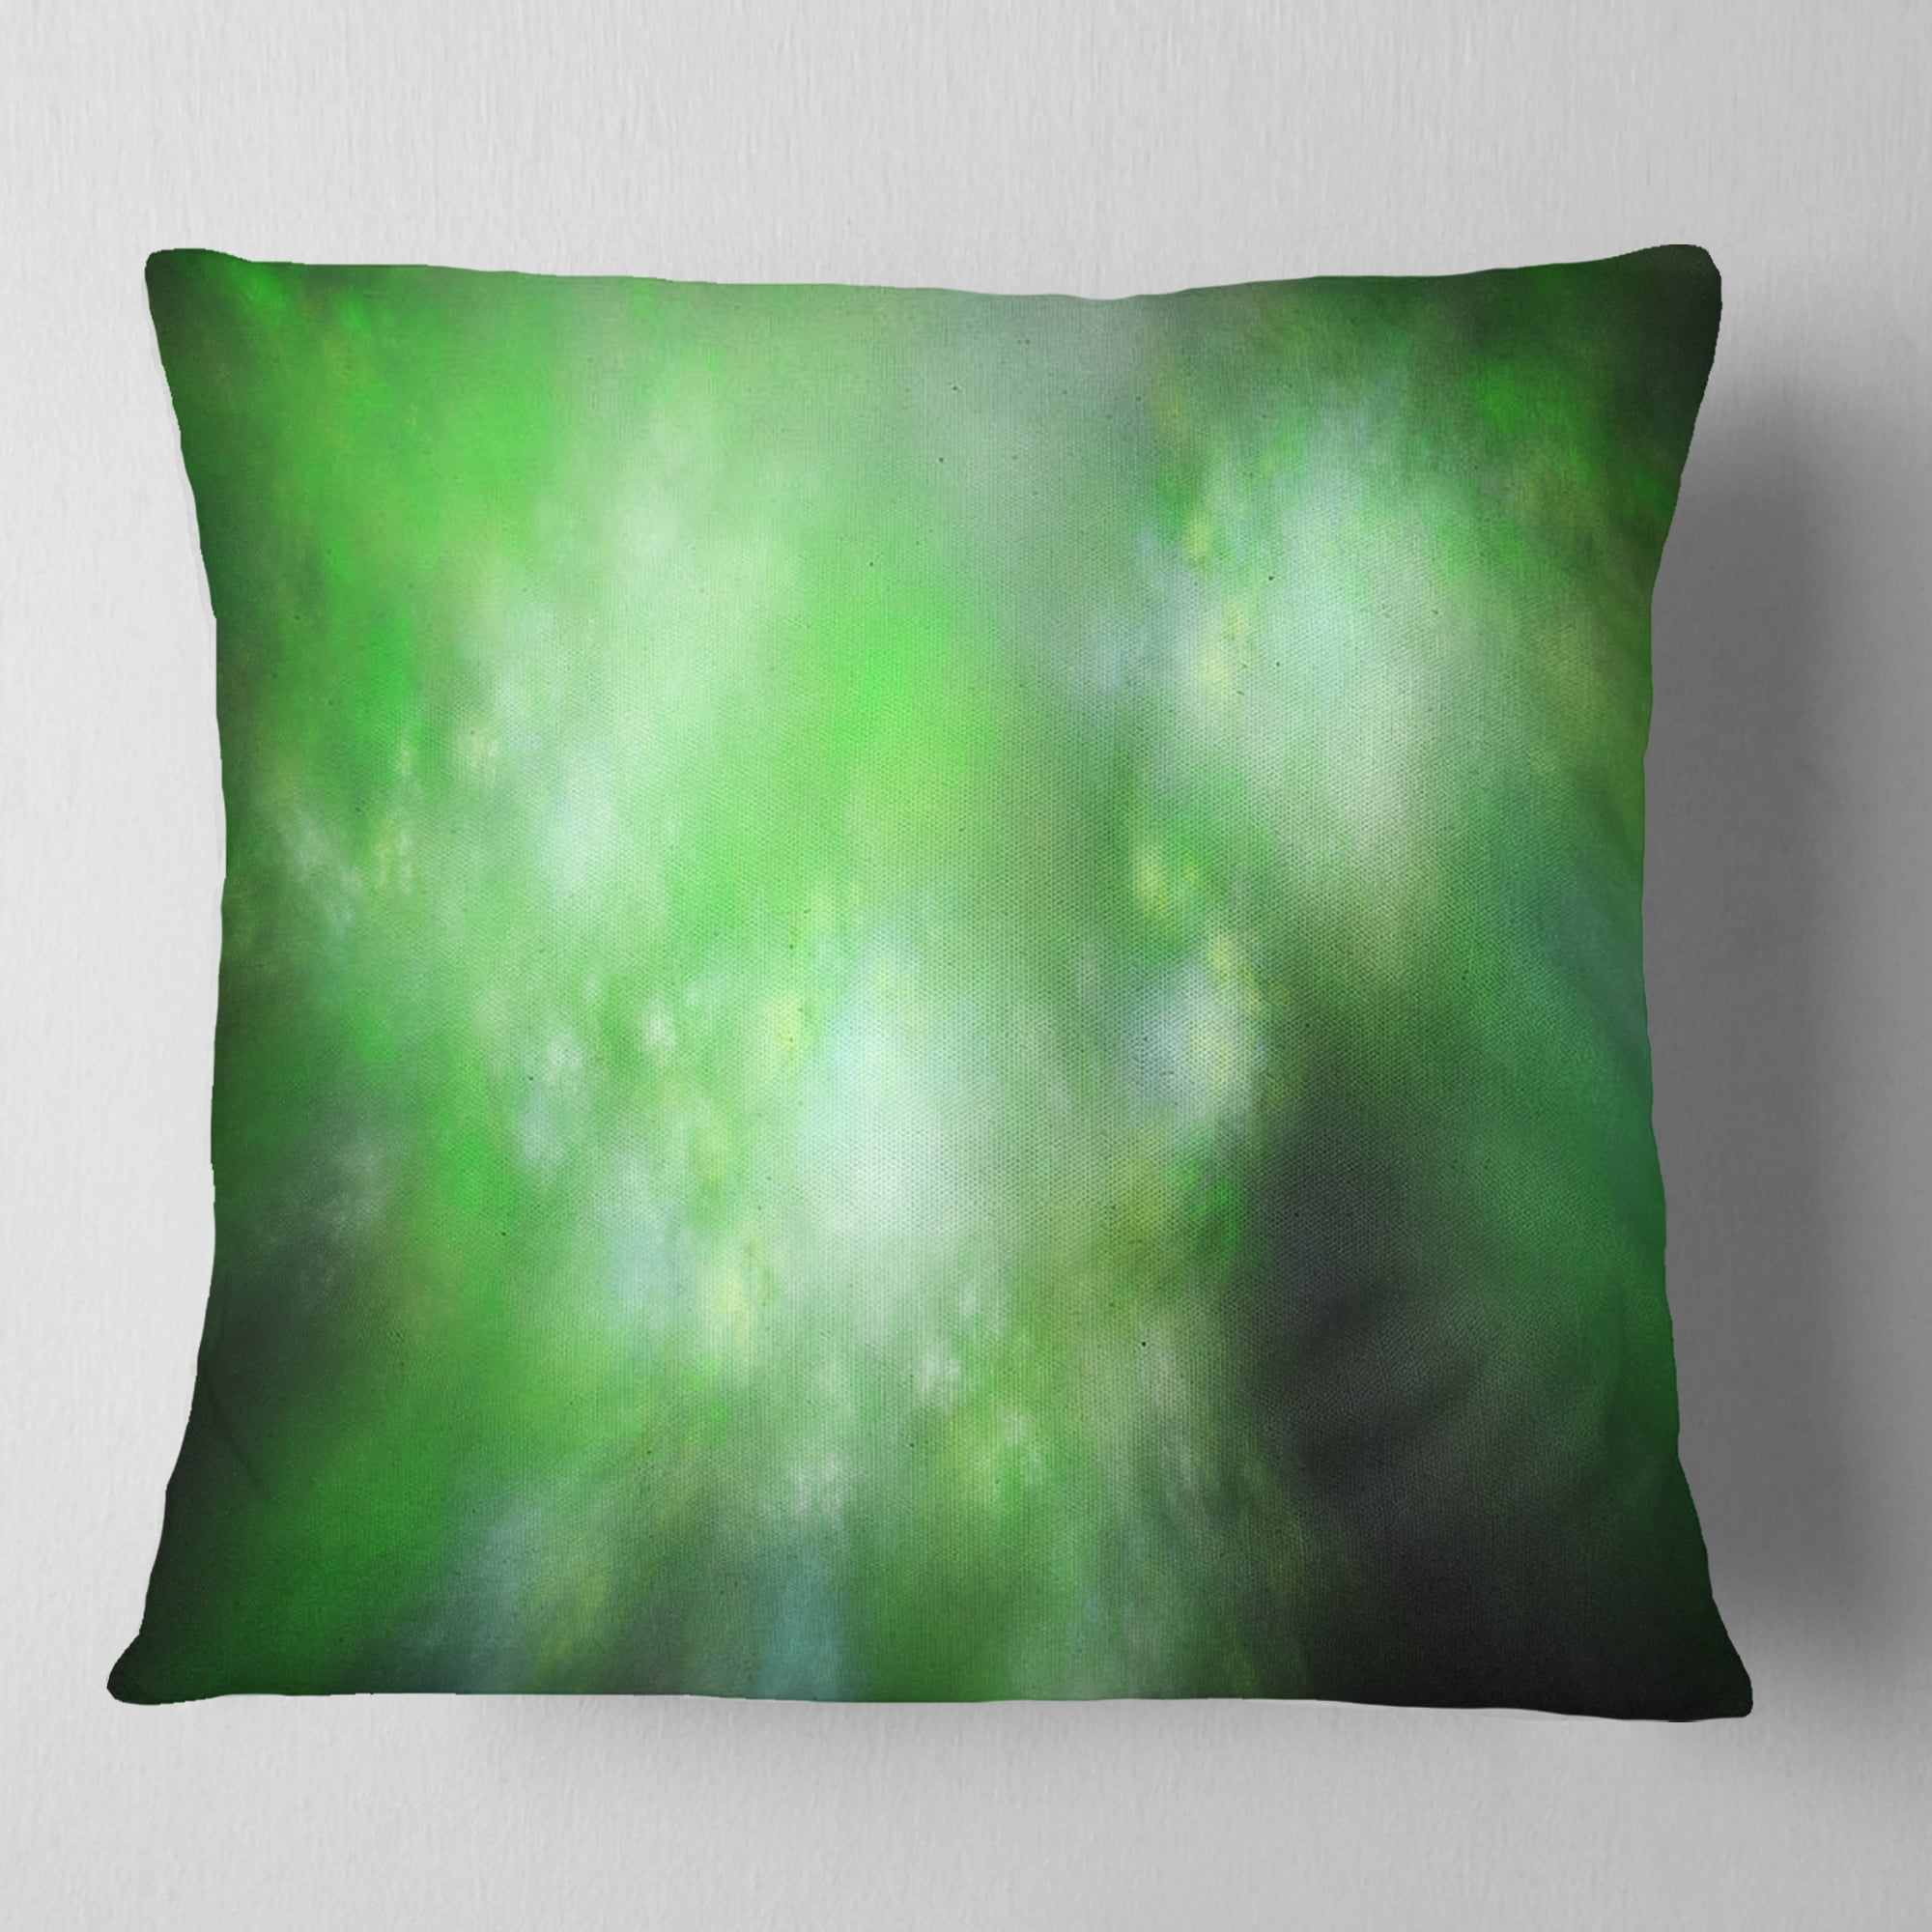 Designart CU16378-18-18 Green Blur Sky with Stars Abstract Cushion Cover for Living Room Sofa Throw Pillow 18 x 18